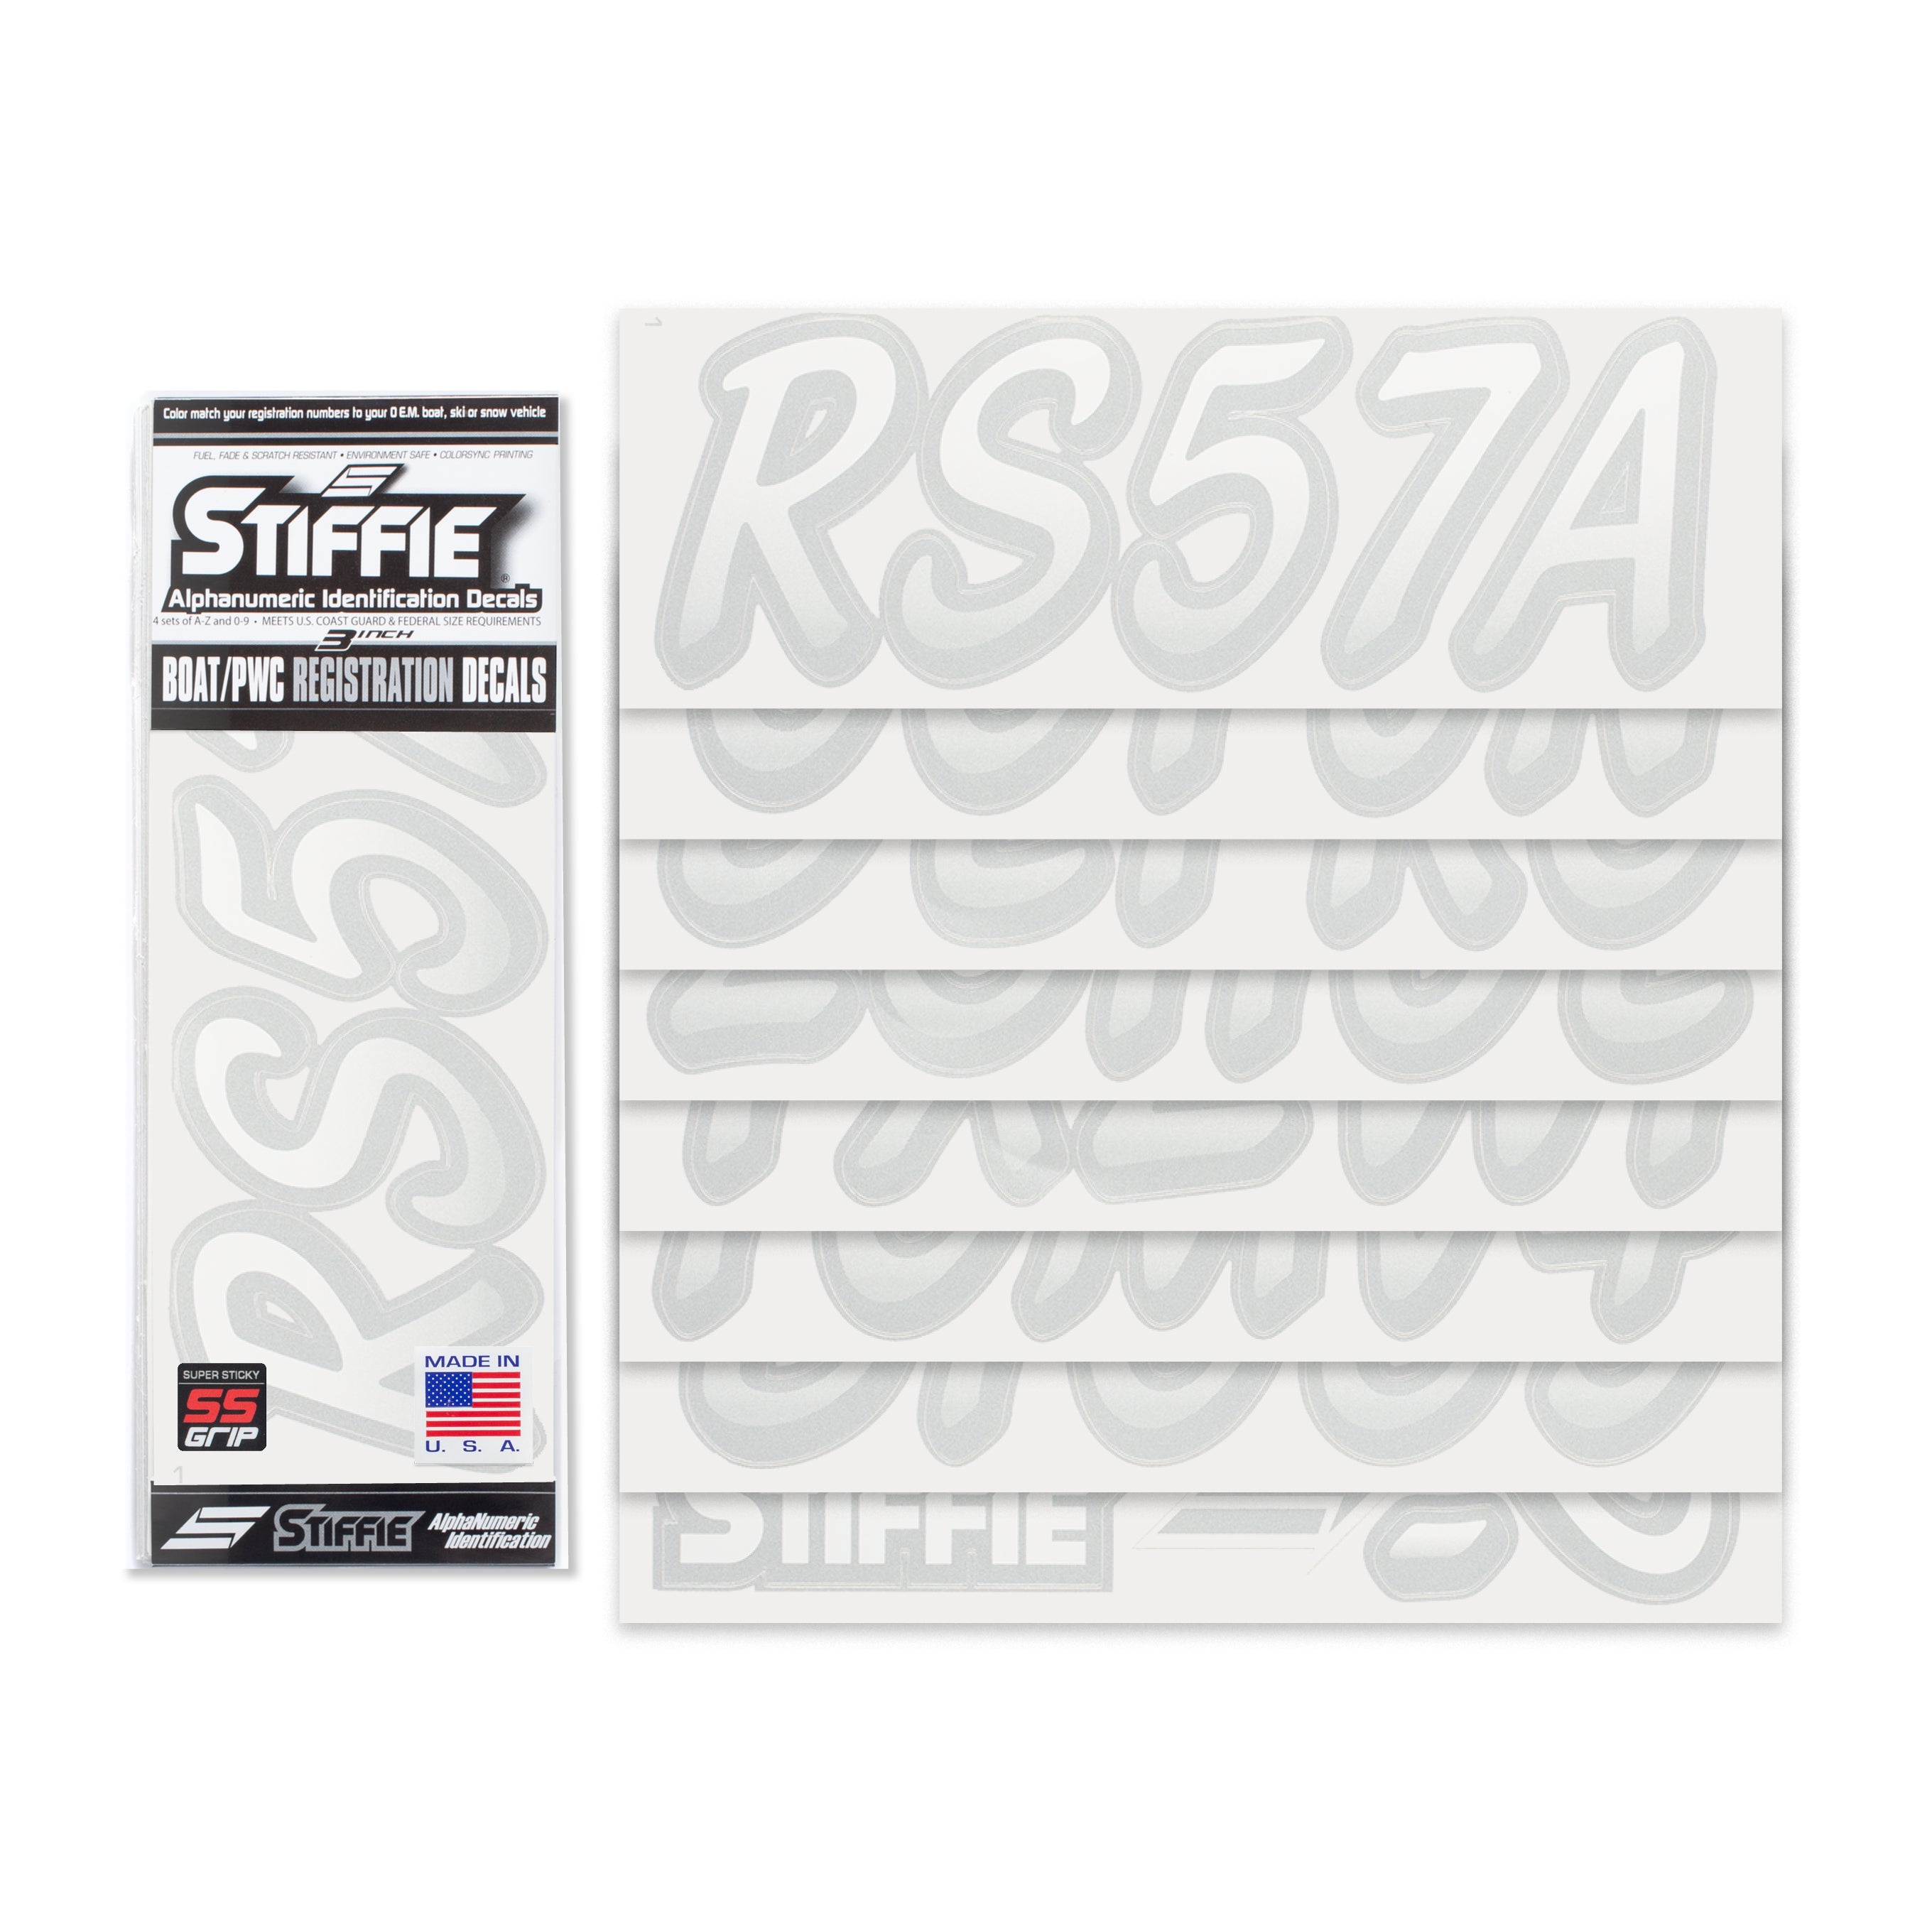 Stiffie Whipline White/Silver Super Sticky 3" Alpha Numeric Registration Identification Numbers Stickers Decals for Sea-Doo Spark, Inflatable Boats, Ribs, Hypalon/PVC, PWC and Boats.